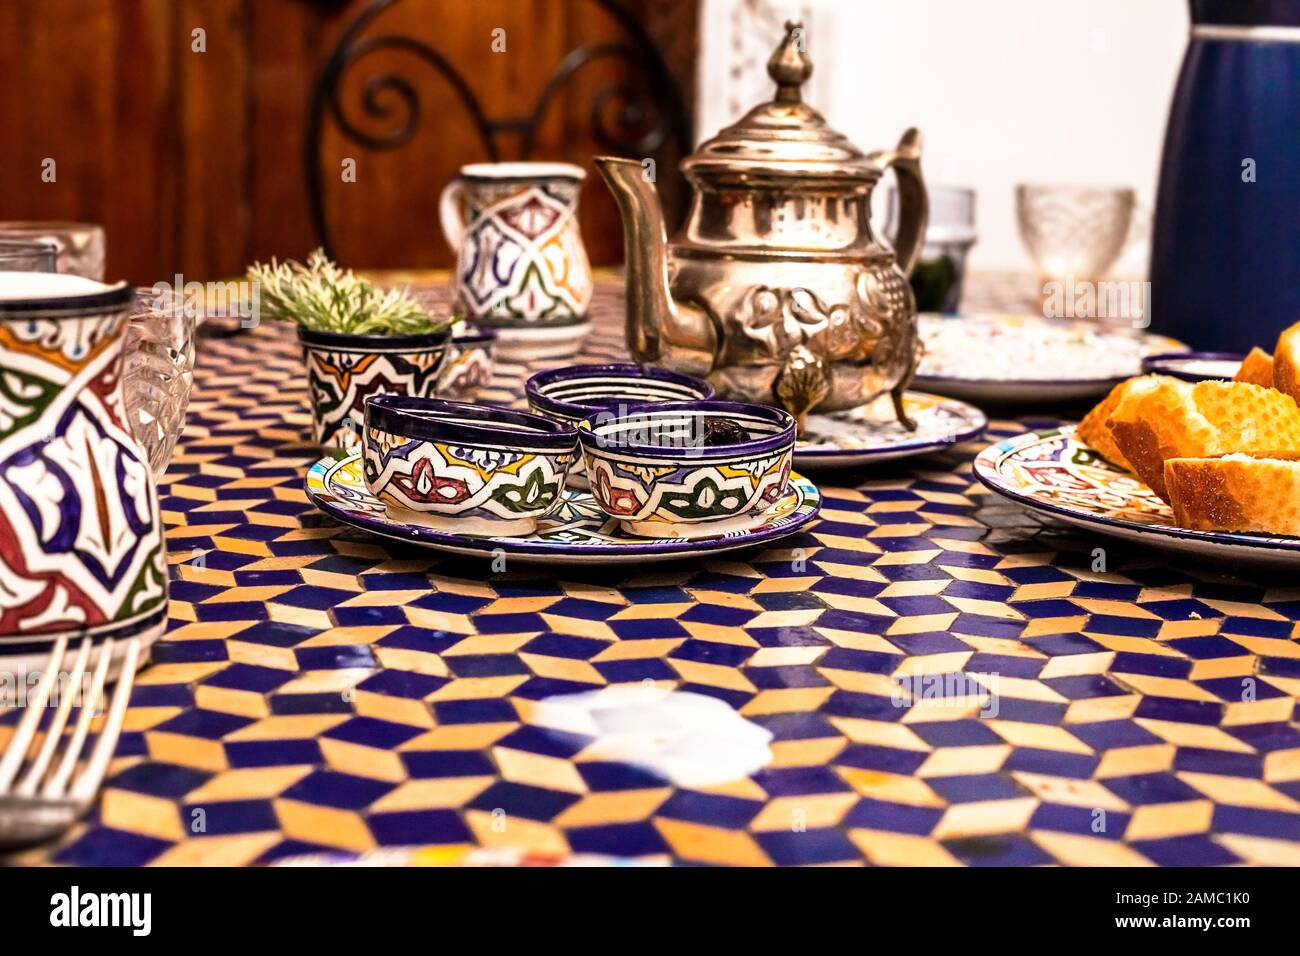 Typical, traditional Moroccan breakfast in a typical Maracan house. Tasty Moroccan style breakfast. Fes, Morocco Stock Photo